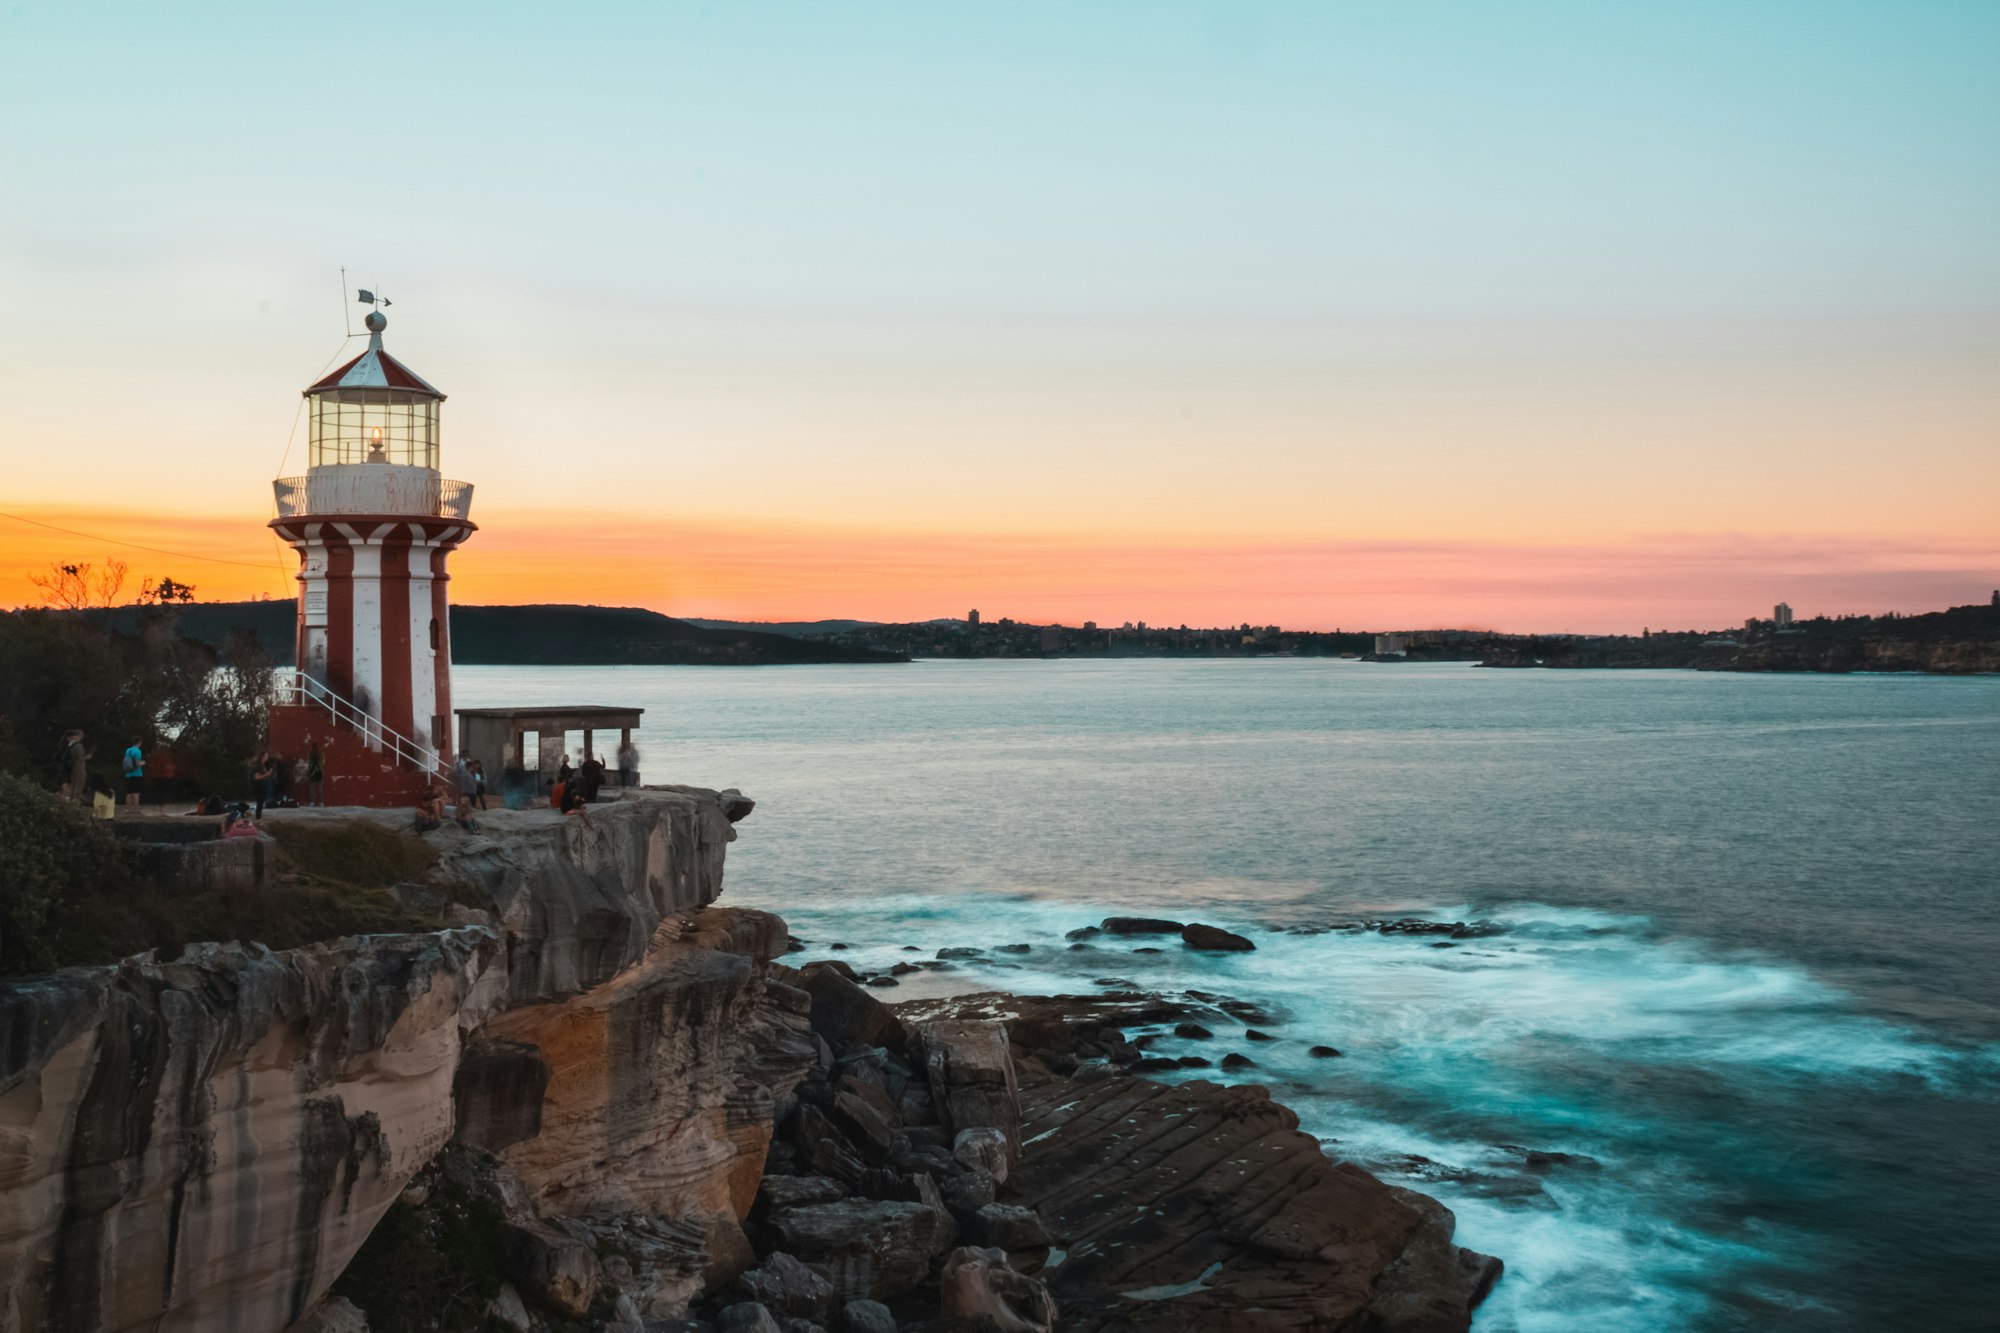 This photo was taken at the Watsons Bay’s lighthouse, in Sydney Australia.
We took the ferry at the end of the day and then walk 20 minutes to get there. We were almost running to not miss the sunset.
To get the best shot I had to go at the edge of the cliff and some people yelled at me saying it was dangerous.
I used a tripod and a filter to do a long exposure shot because it was still very luminous.